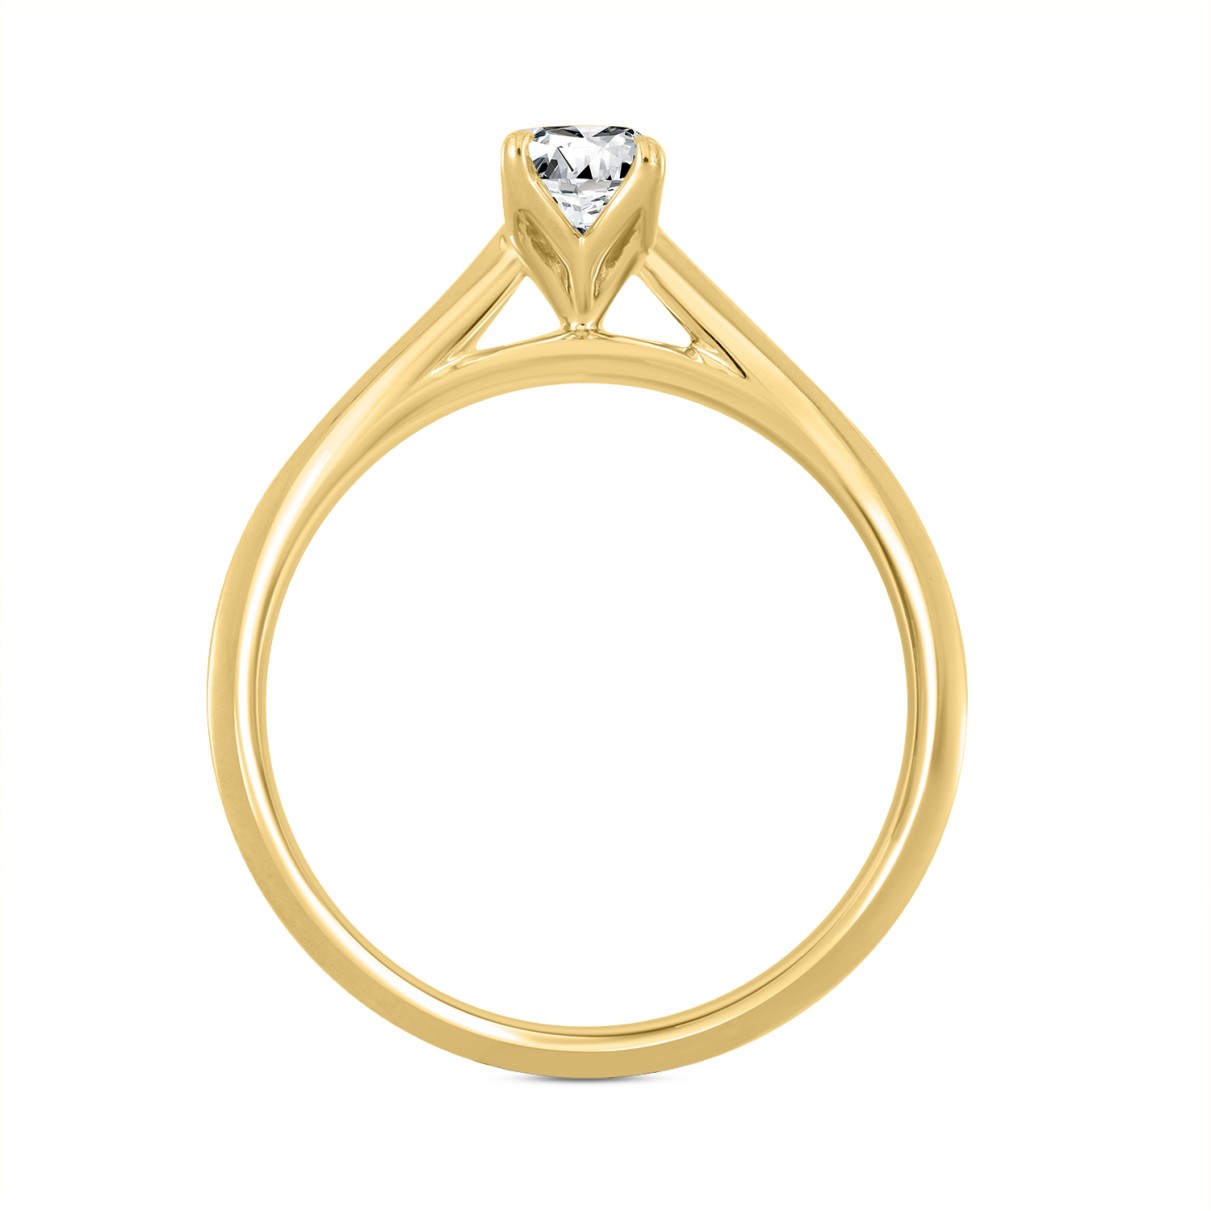 LADIES SOLITAIRE RING 4CT PEAR DIAMOND 14K YELLOW GOLD 